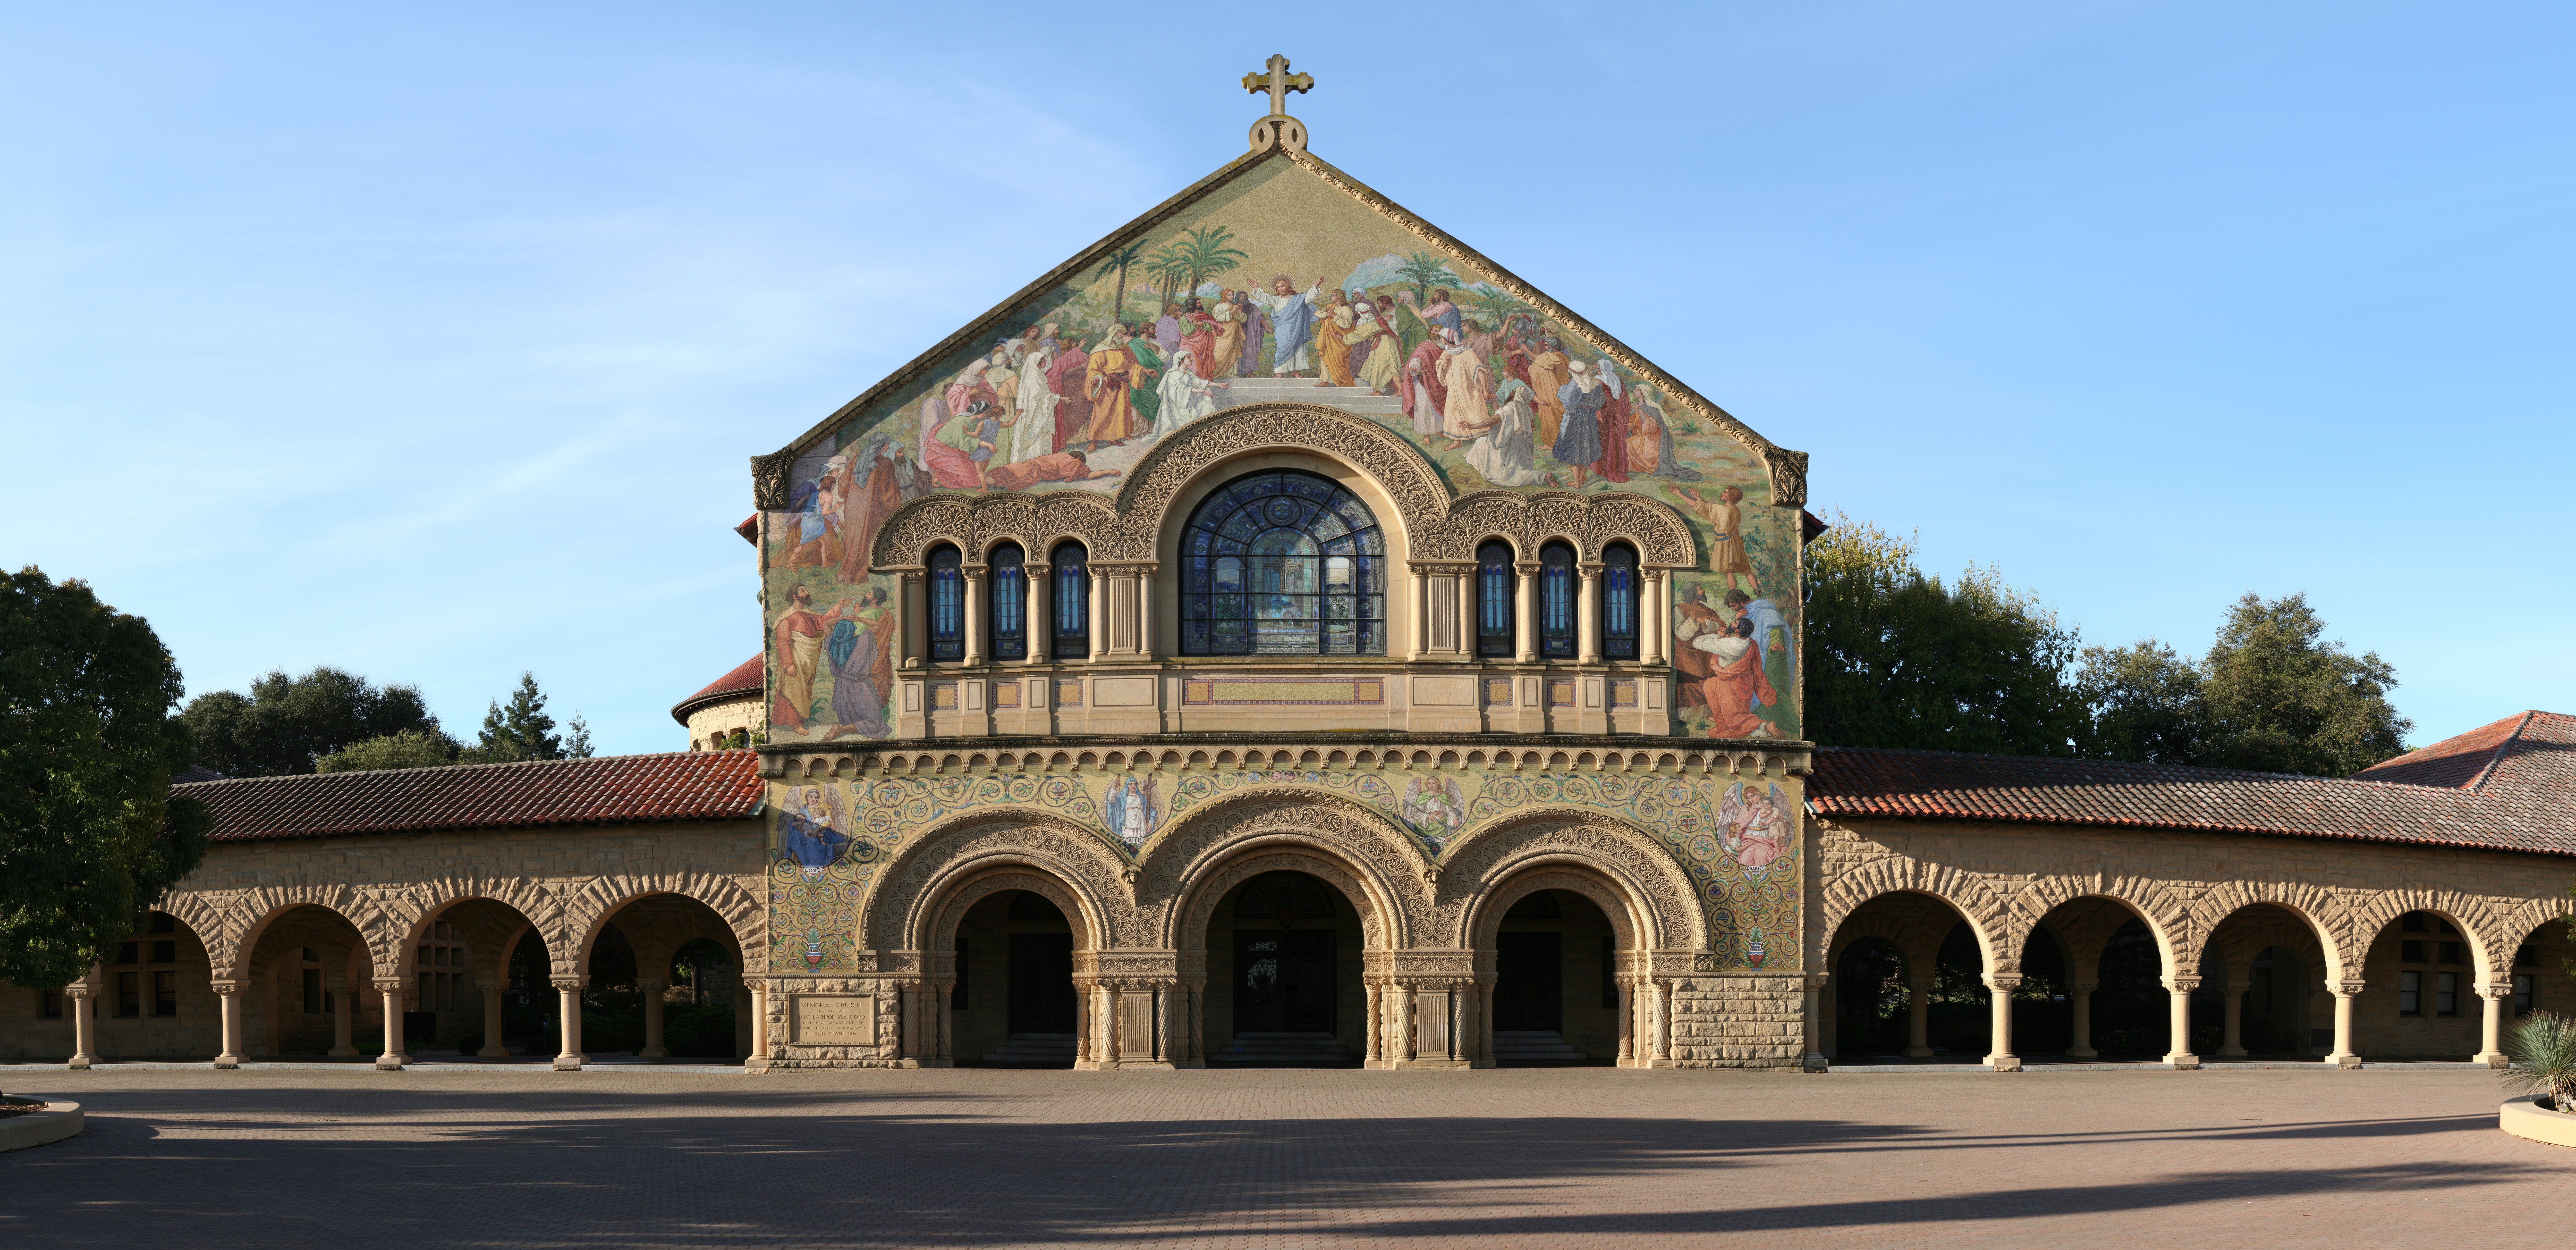 Amazing Stanford Memorial Church Pictures & Backgrounds